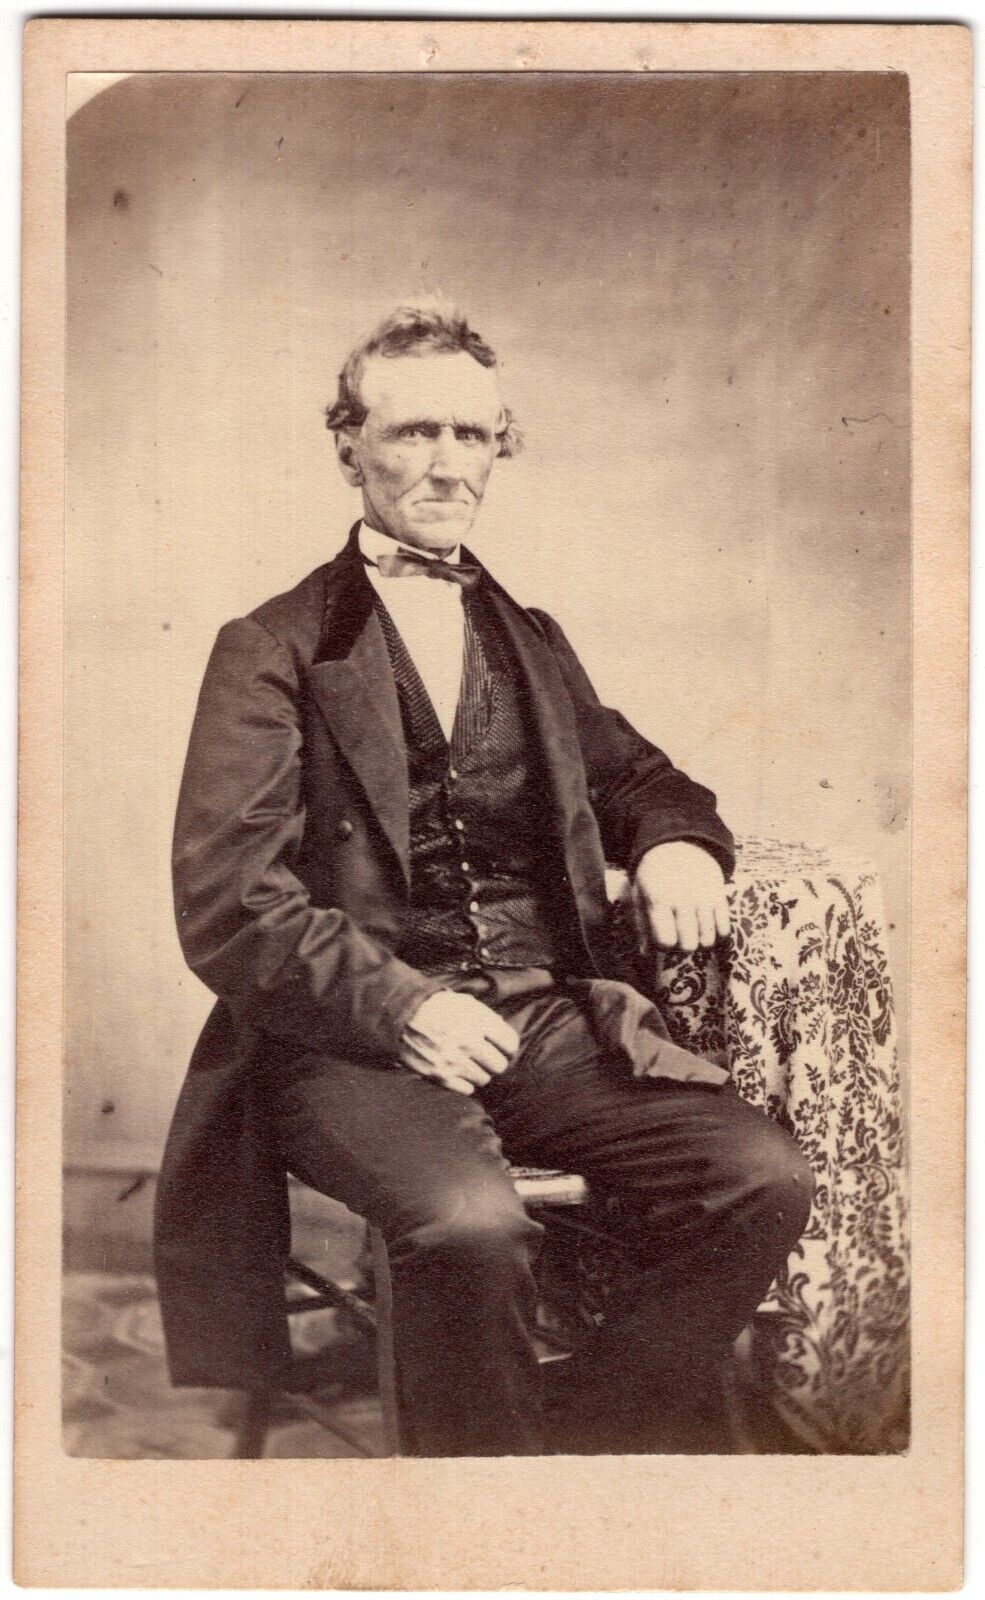 CIRCA 1860s CDV OLD MAN IN SUIT UNMARKED